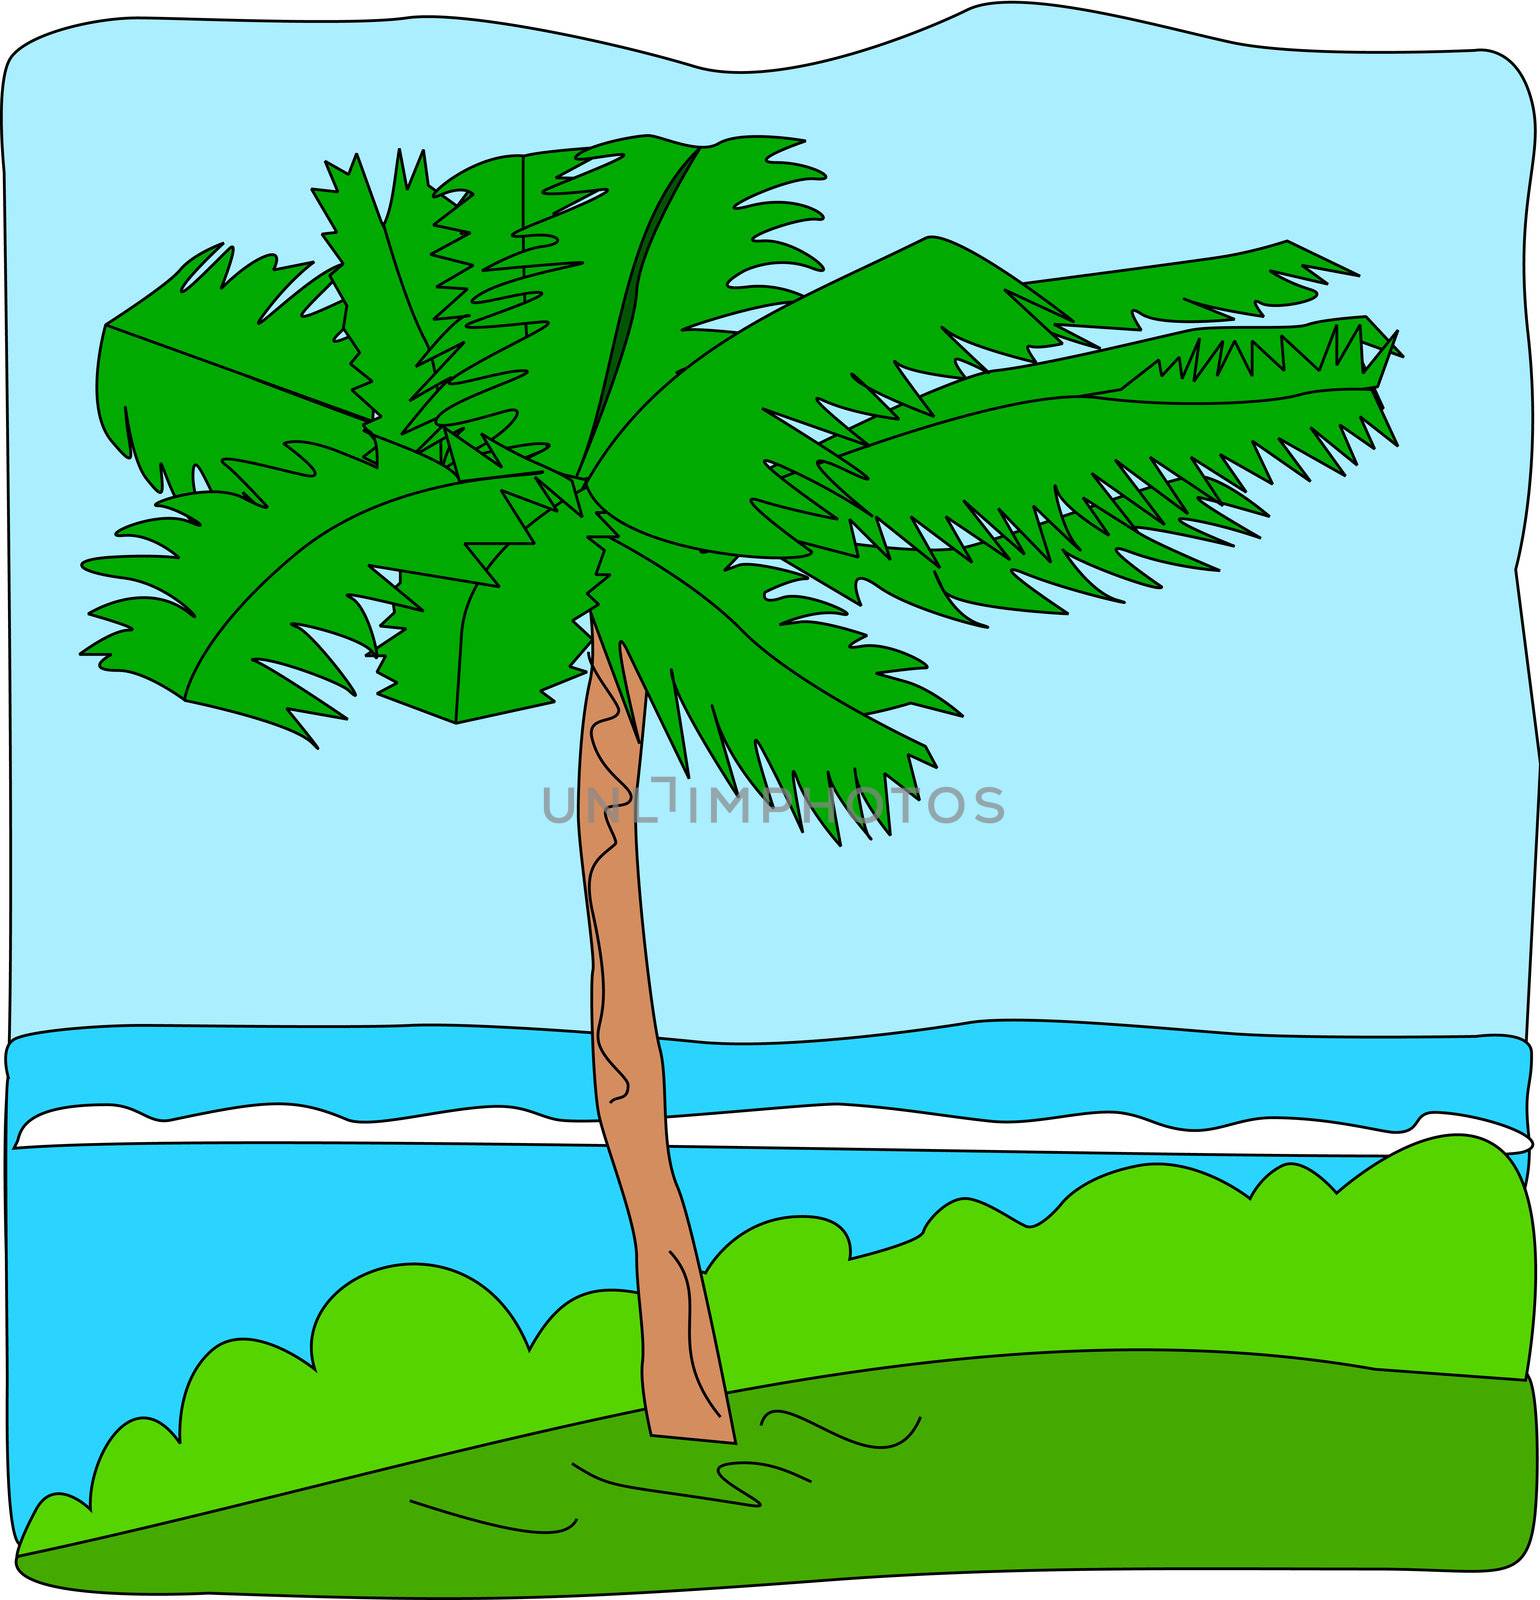 A palm tree blows with the wind, near the coastline, on top of a raised strip.